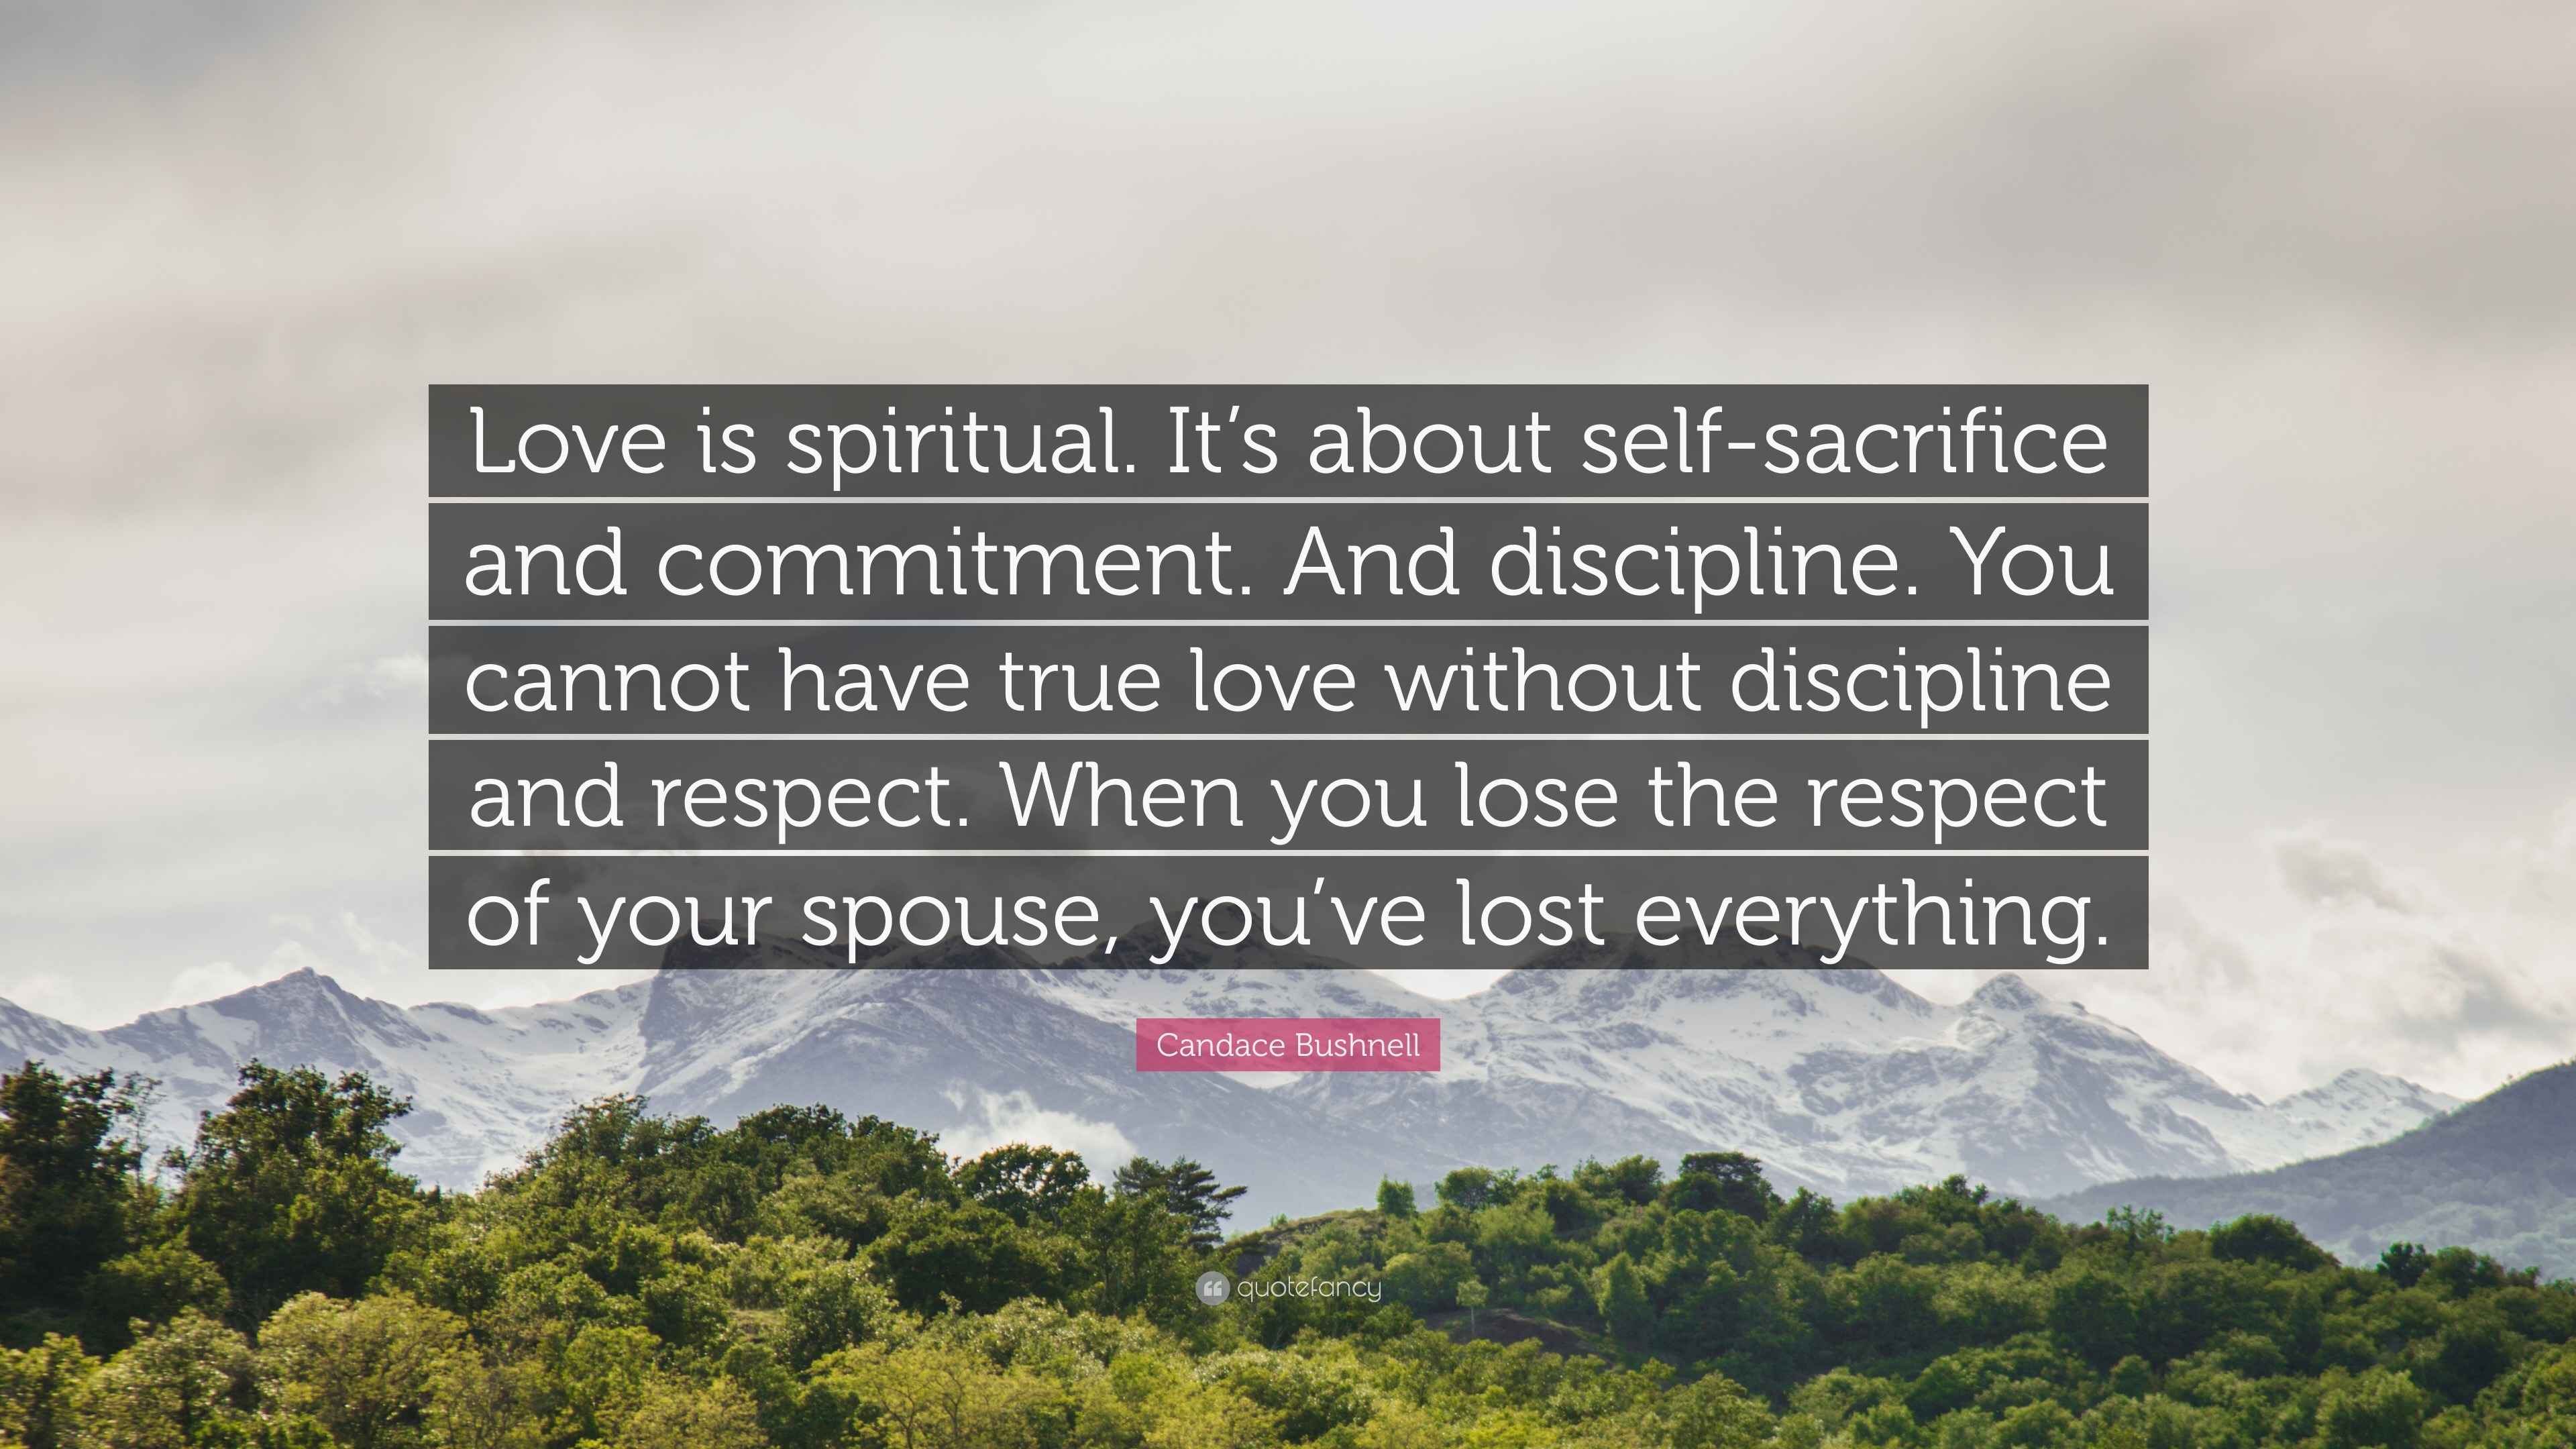 Candace Bushnell Quote “Love is spiritual It s about self sacrifice and mitment